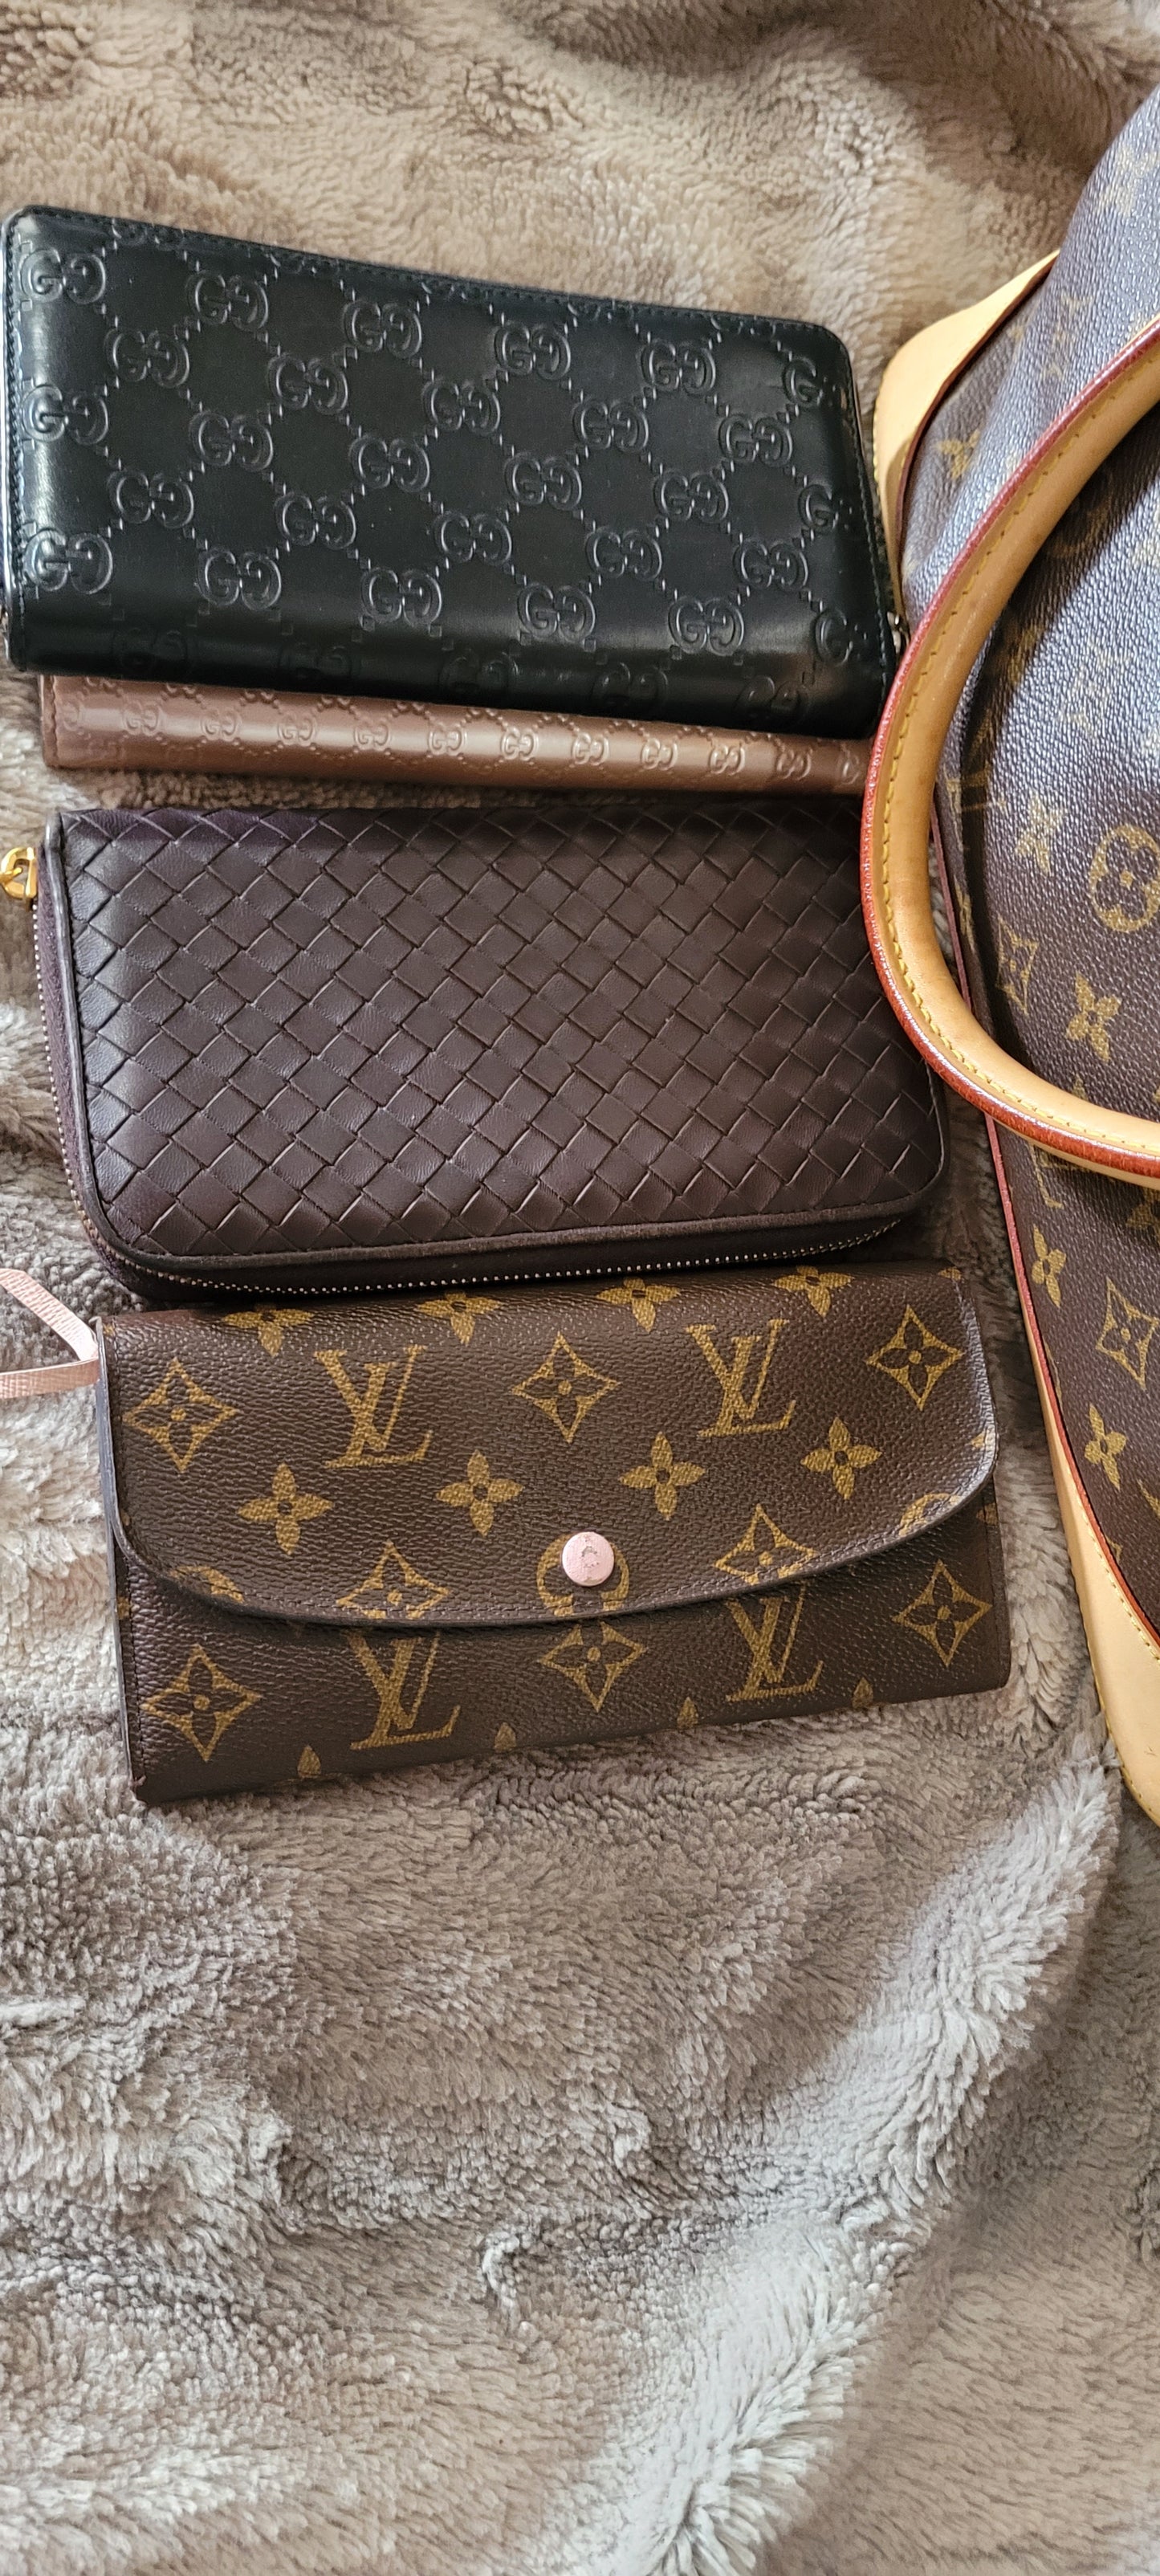 Preowned Bundle of Louis Vuitton, Gucci and Bottega